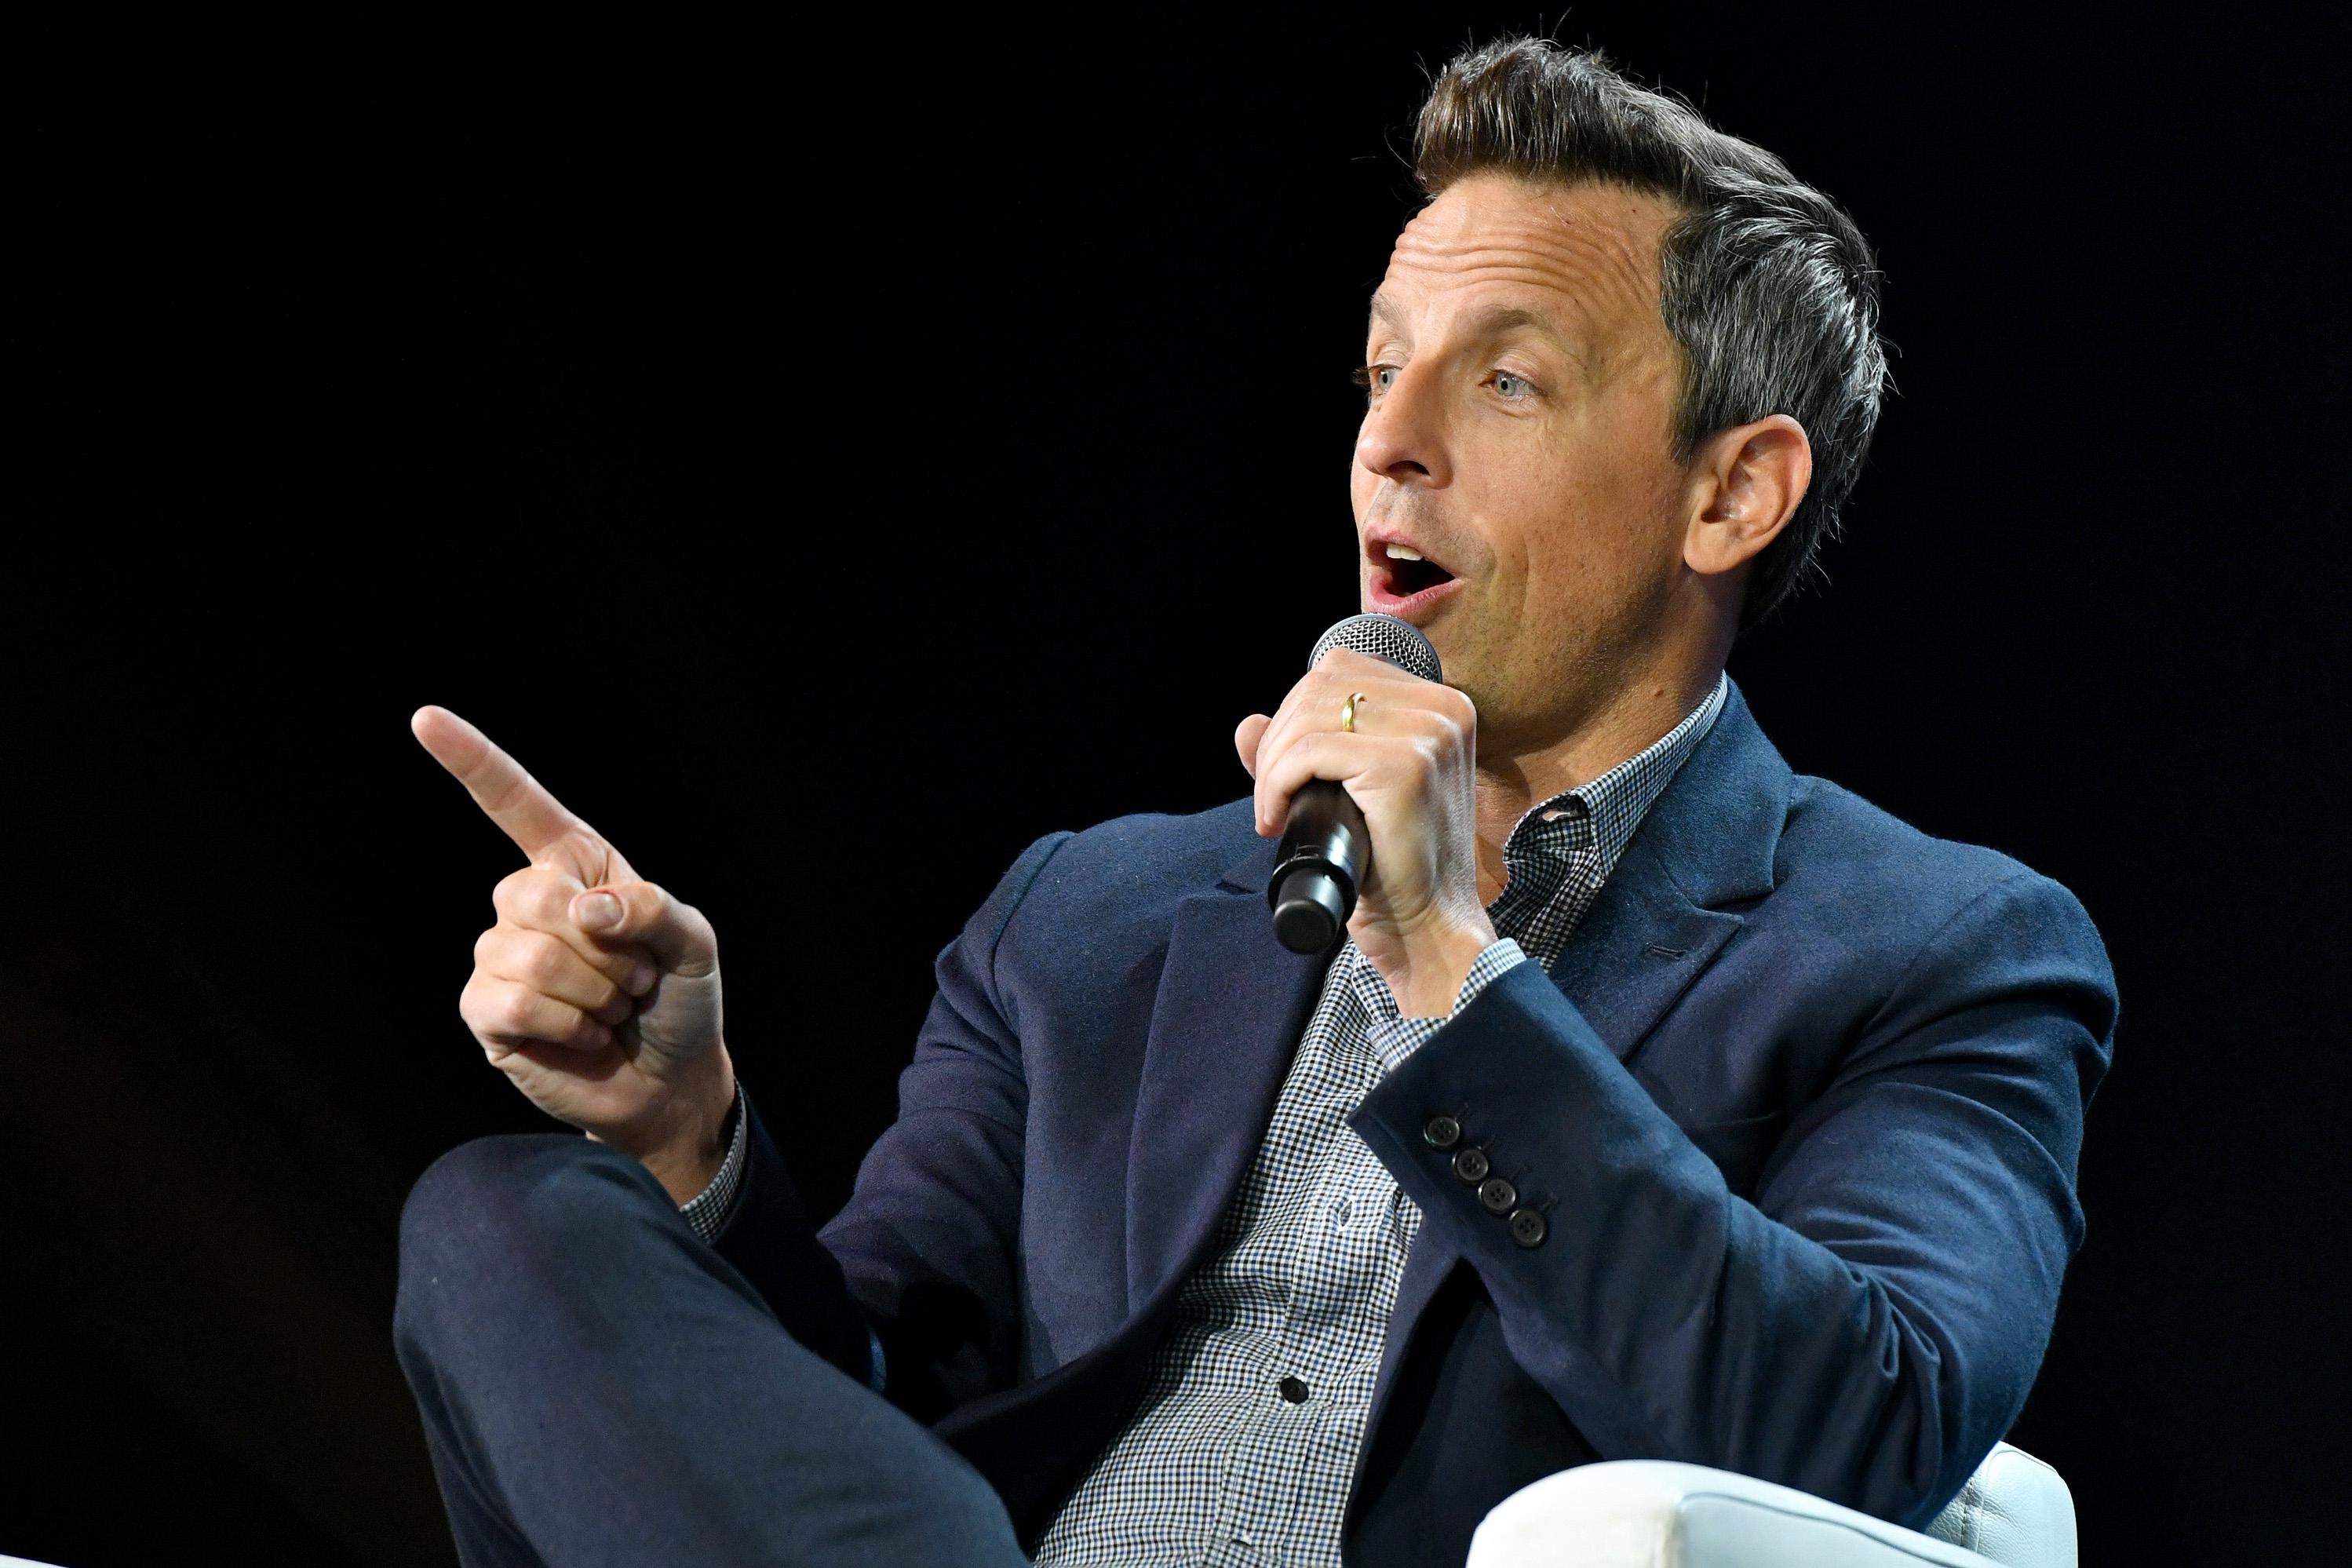 Seth Meyers, Host Late Night with Seth Meyers, holds a microphone and points his finger in front of a black backdrop.